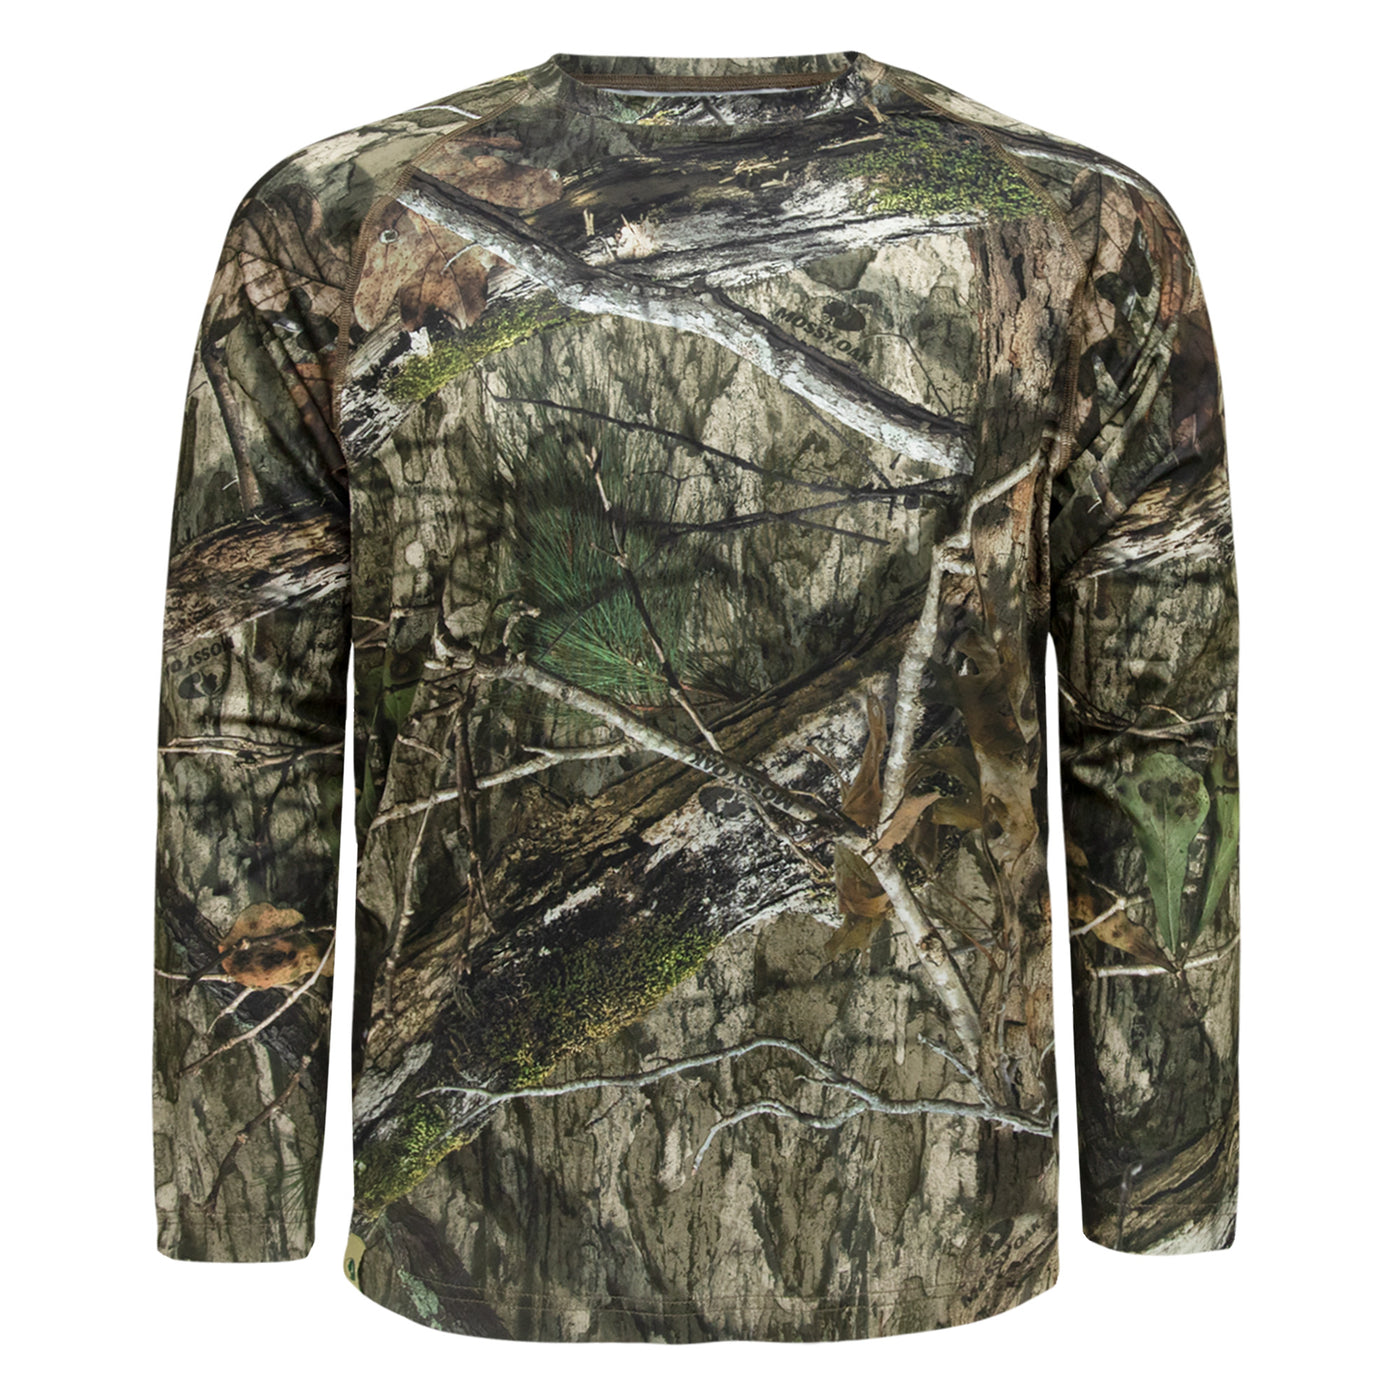 MOSSY OAK® CAMO LS PERFORMANCE SHIRT COUNTRY DNA